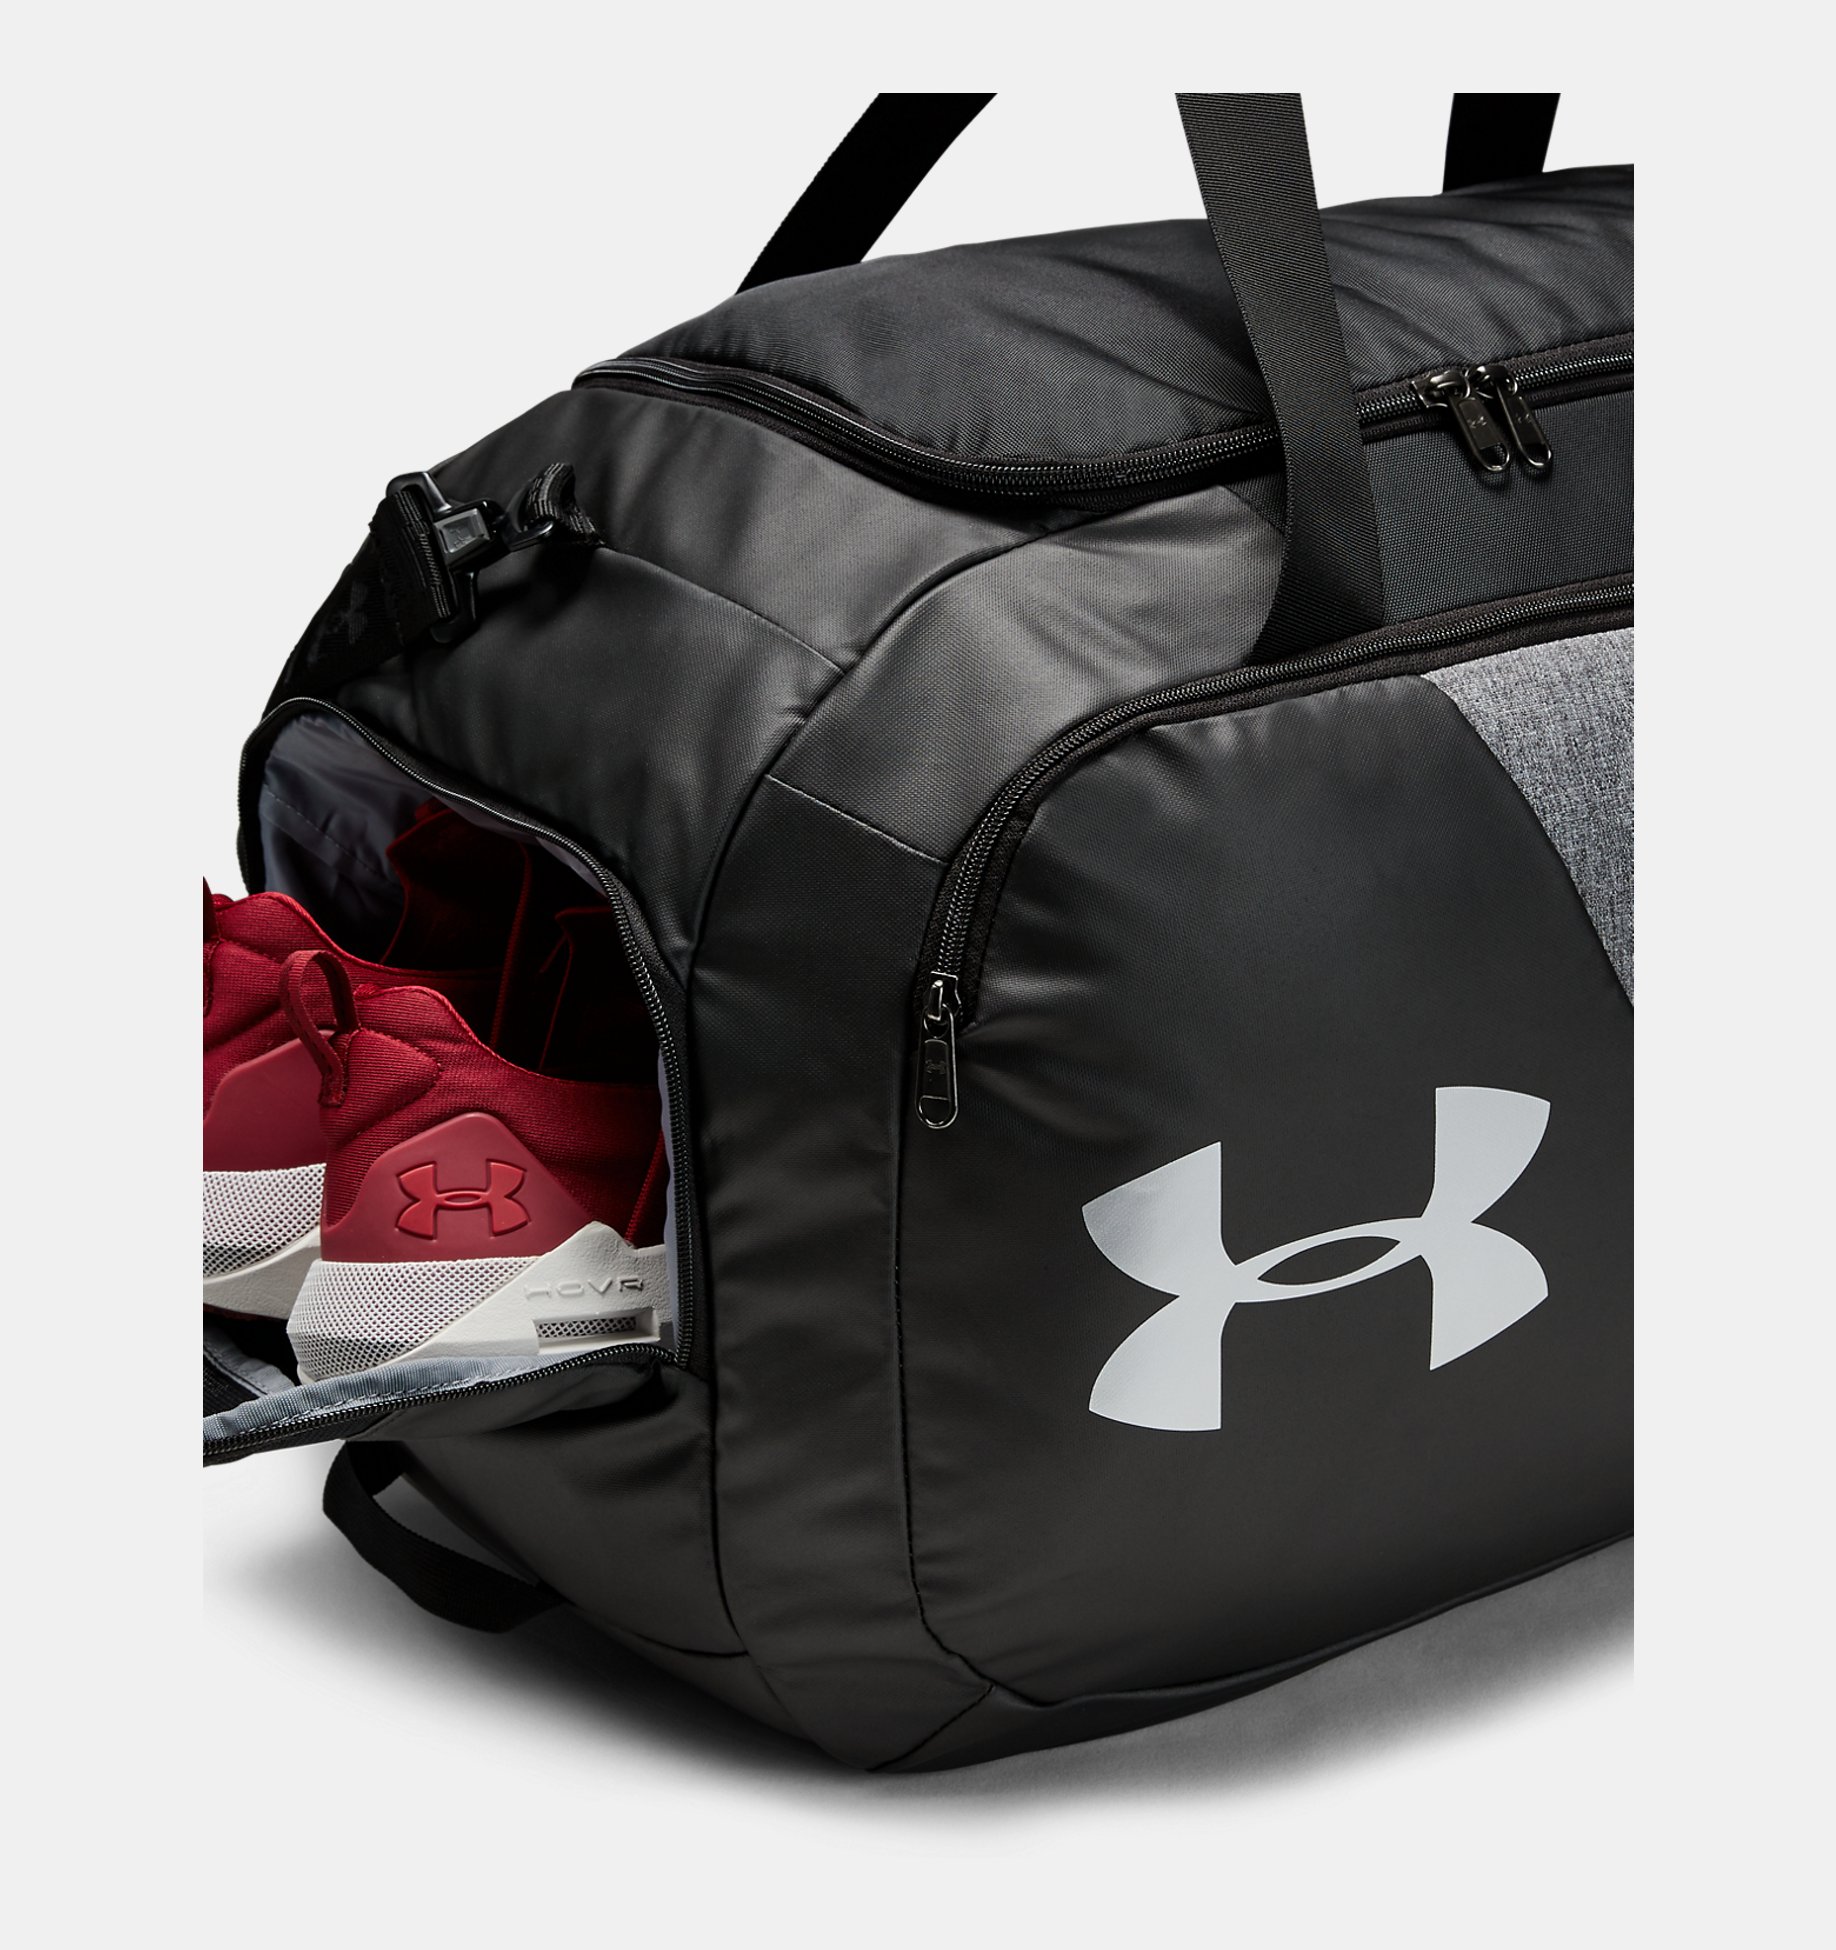 Under Armour Undeniable Duffel 4.0 Large Duffle Bag 